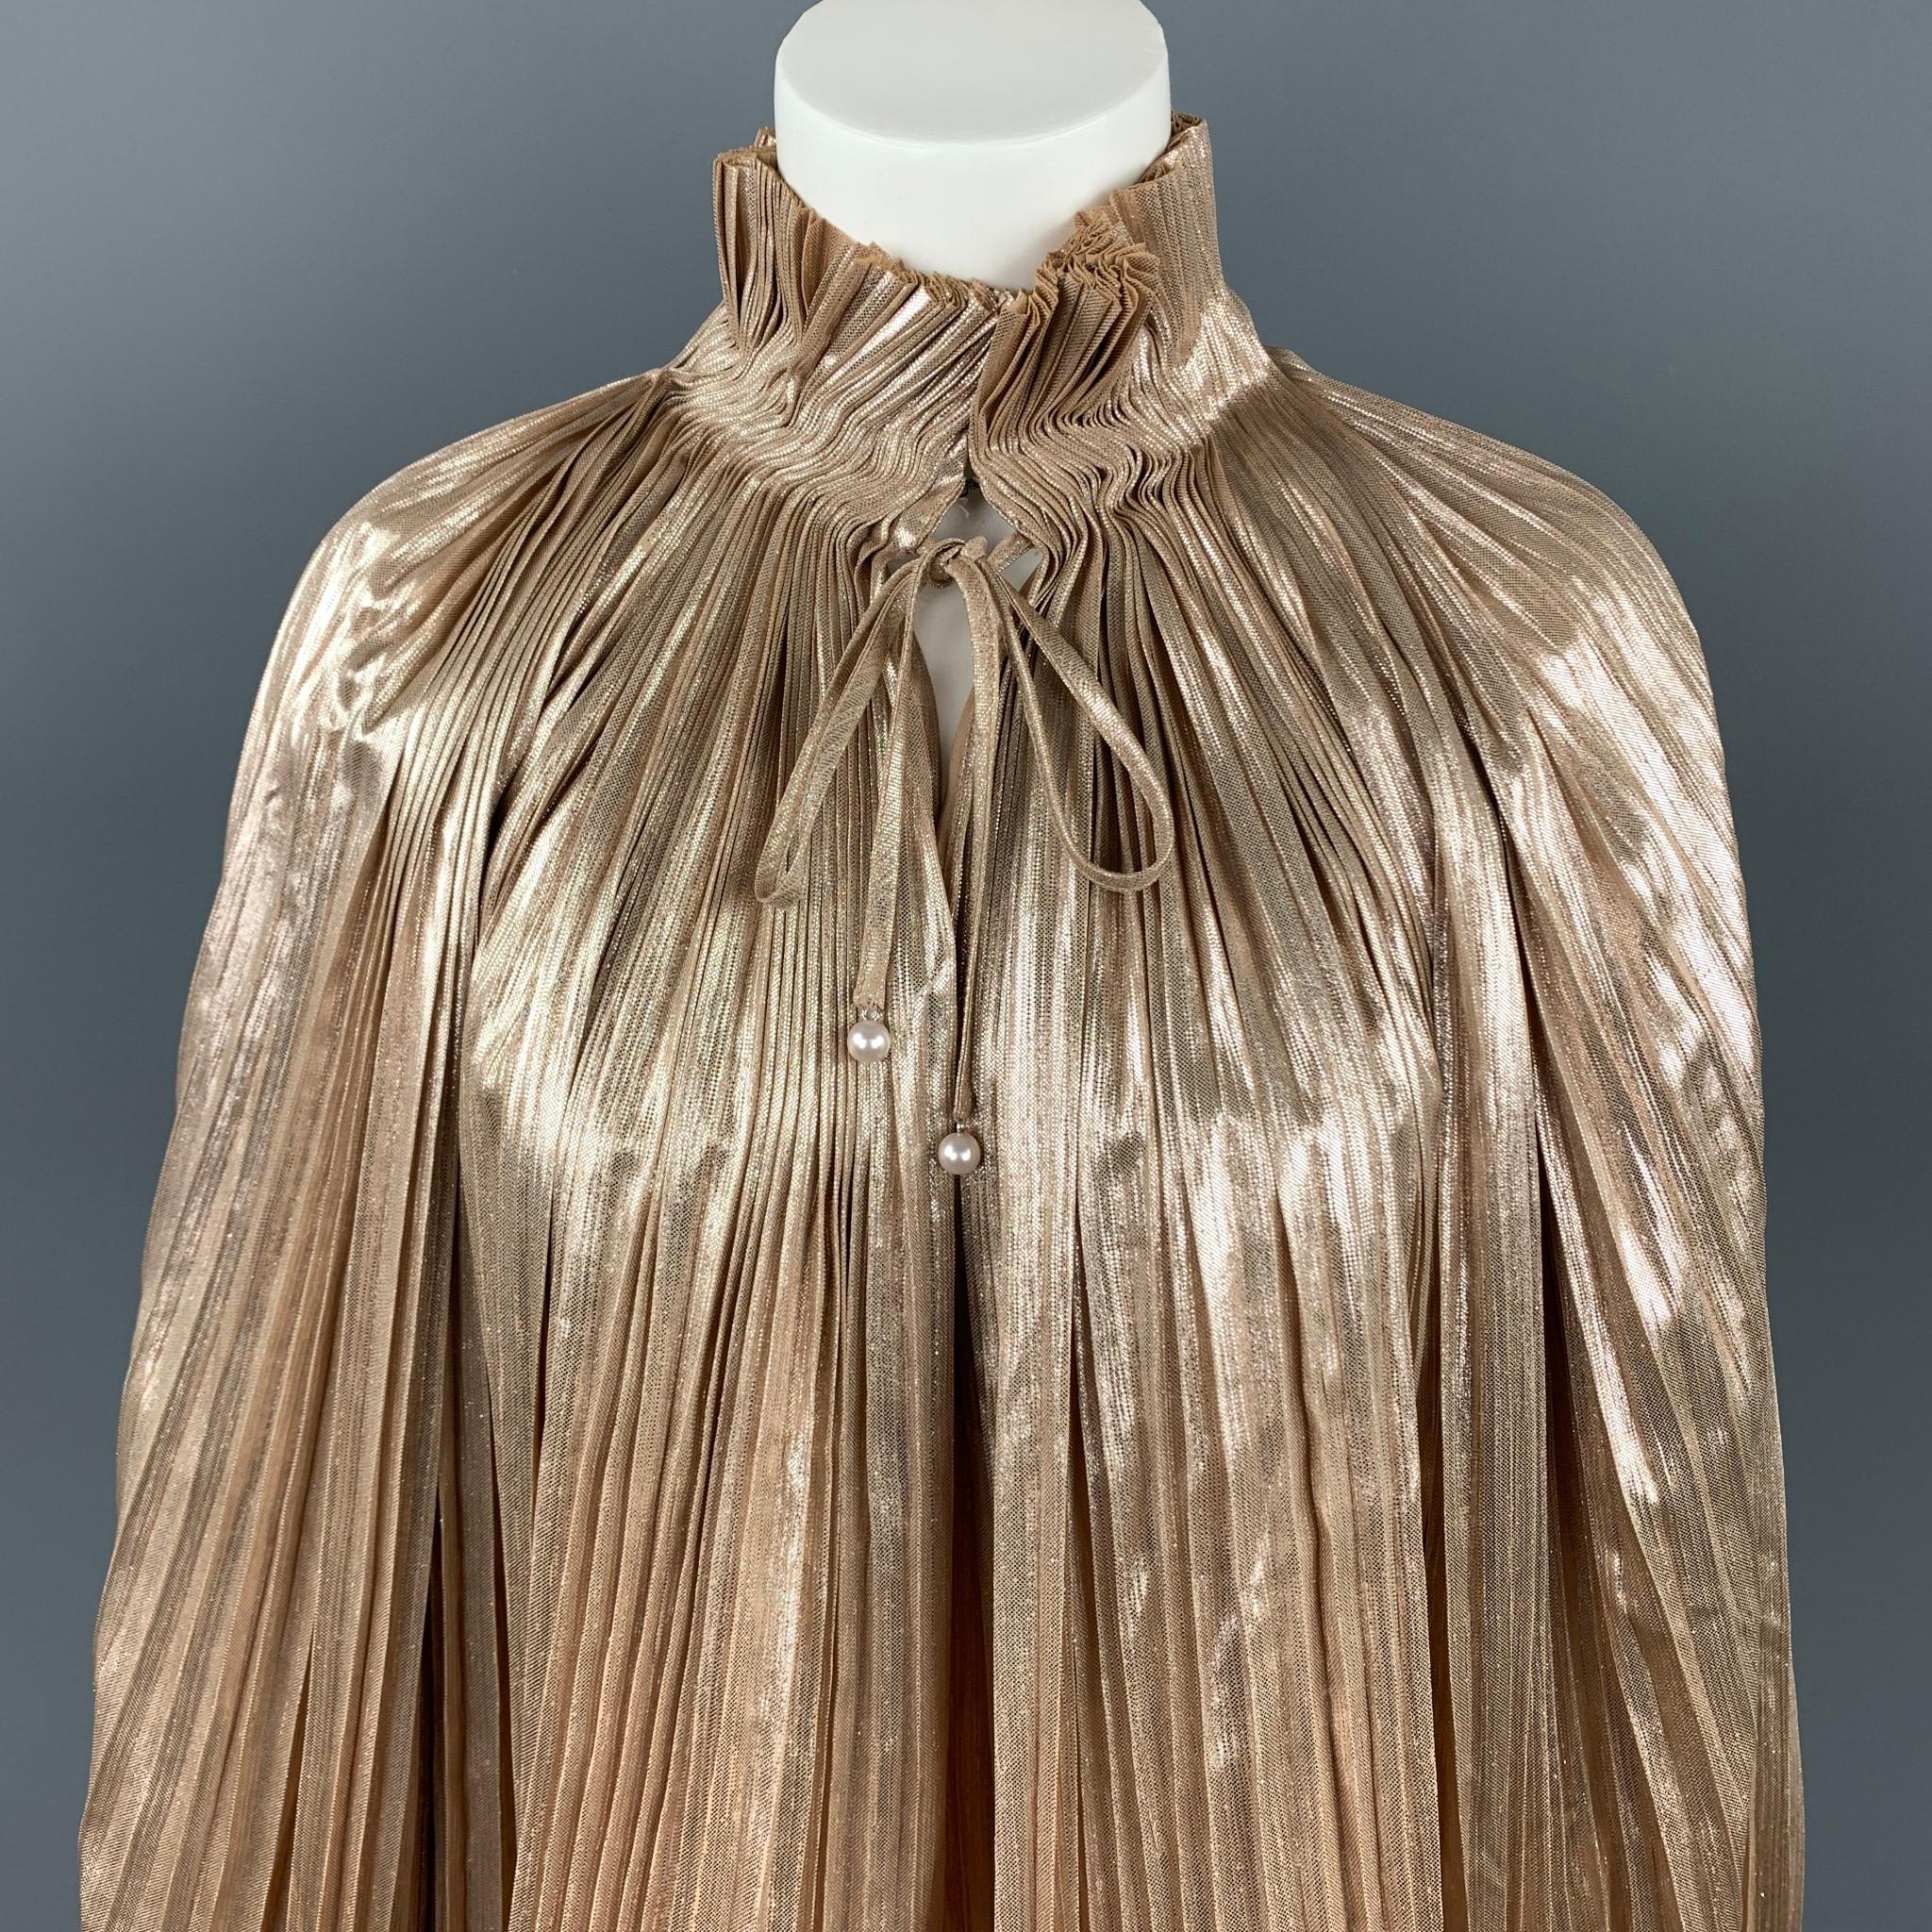 OPENING CEREMONY blouse comes in a gold metallic pleated polyester featuring a high collar, balloon sleeves, hook & loop, and front beaded drawstring detail.

Very Good Pre-Owned Condition.
Marked: 10

Measurements:

Shoulder: 17 in.
Bust: 40